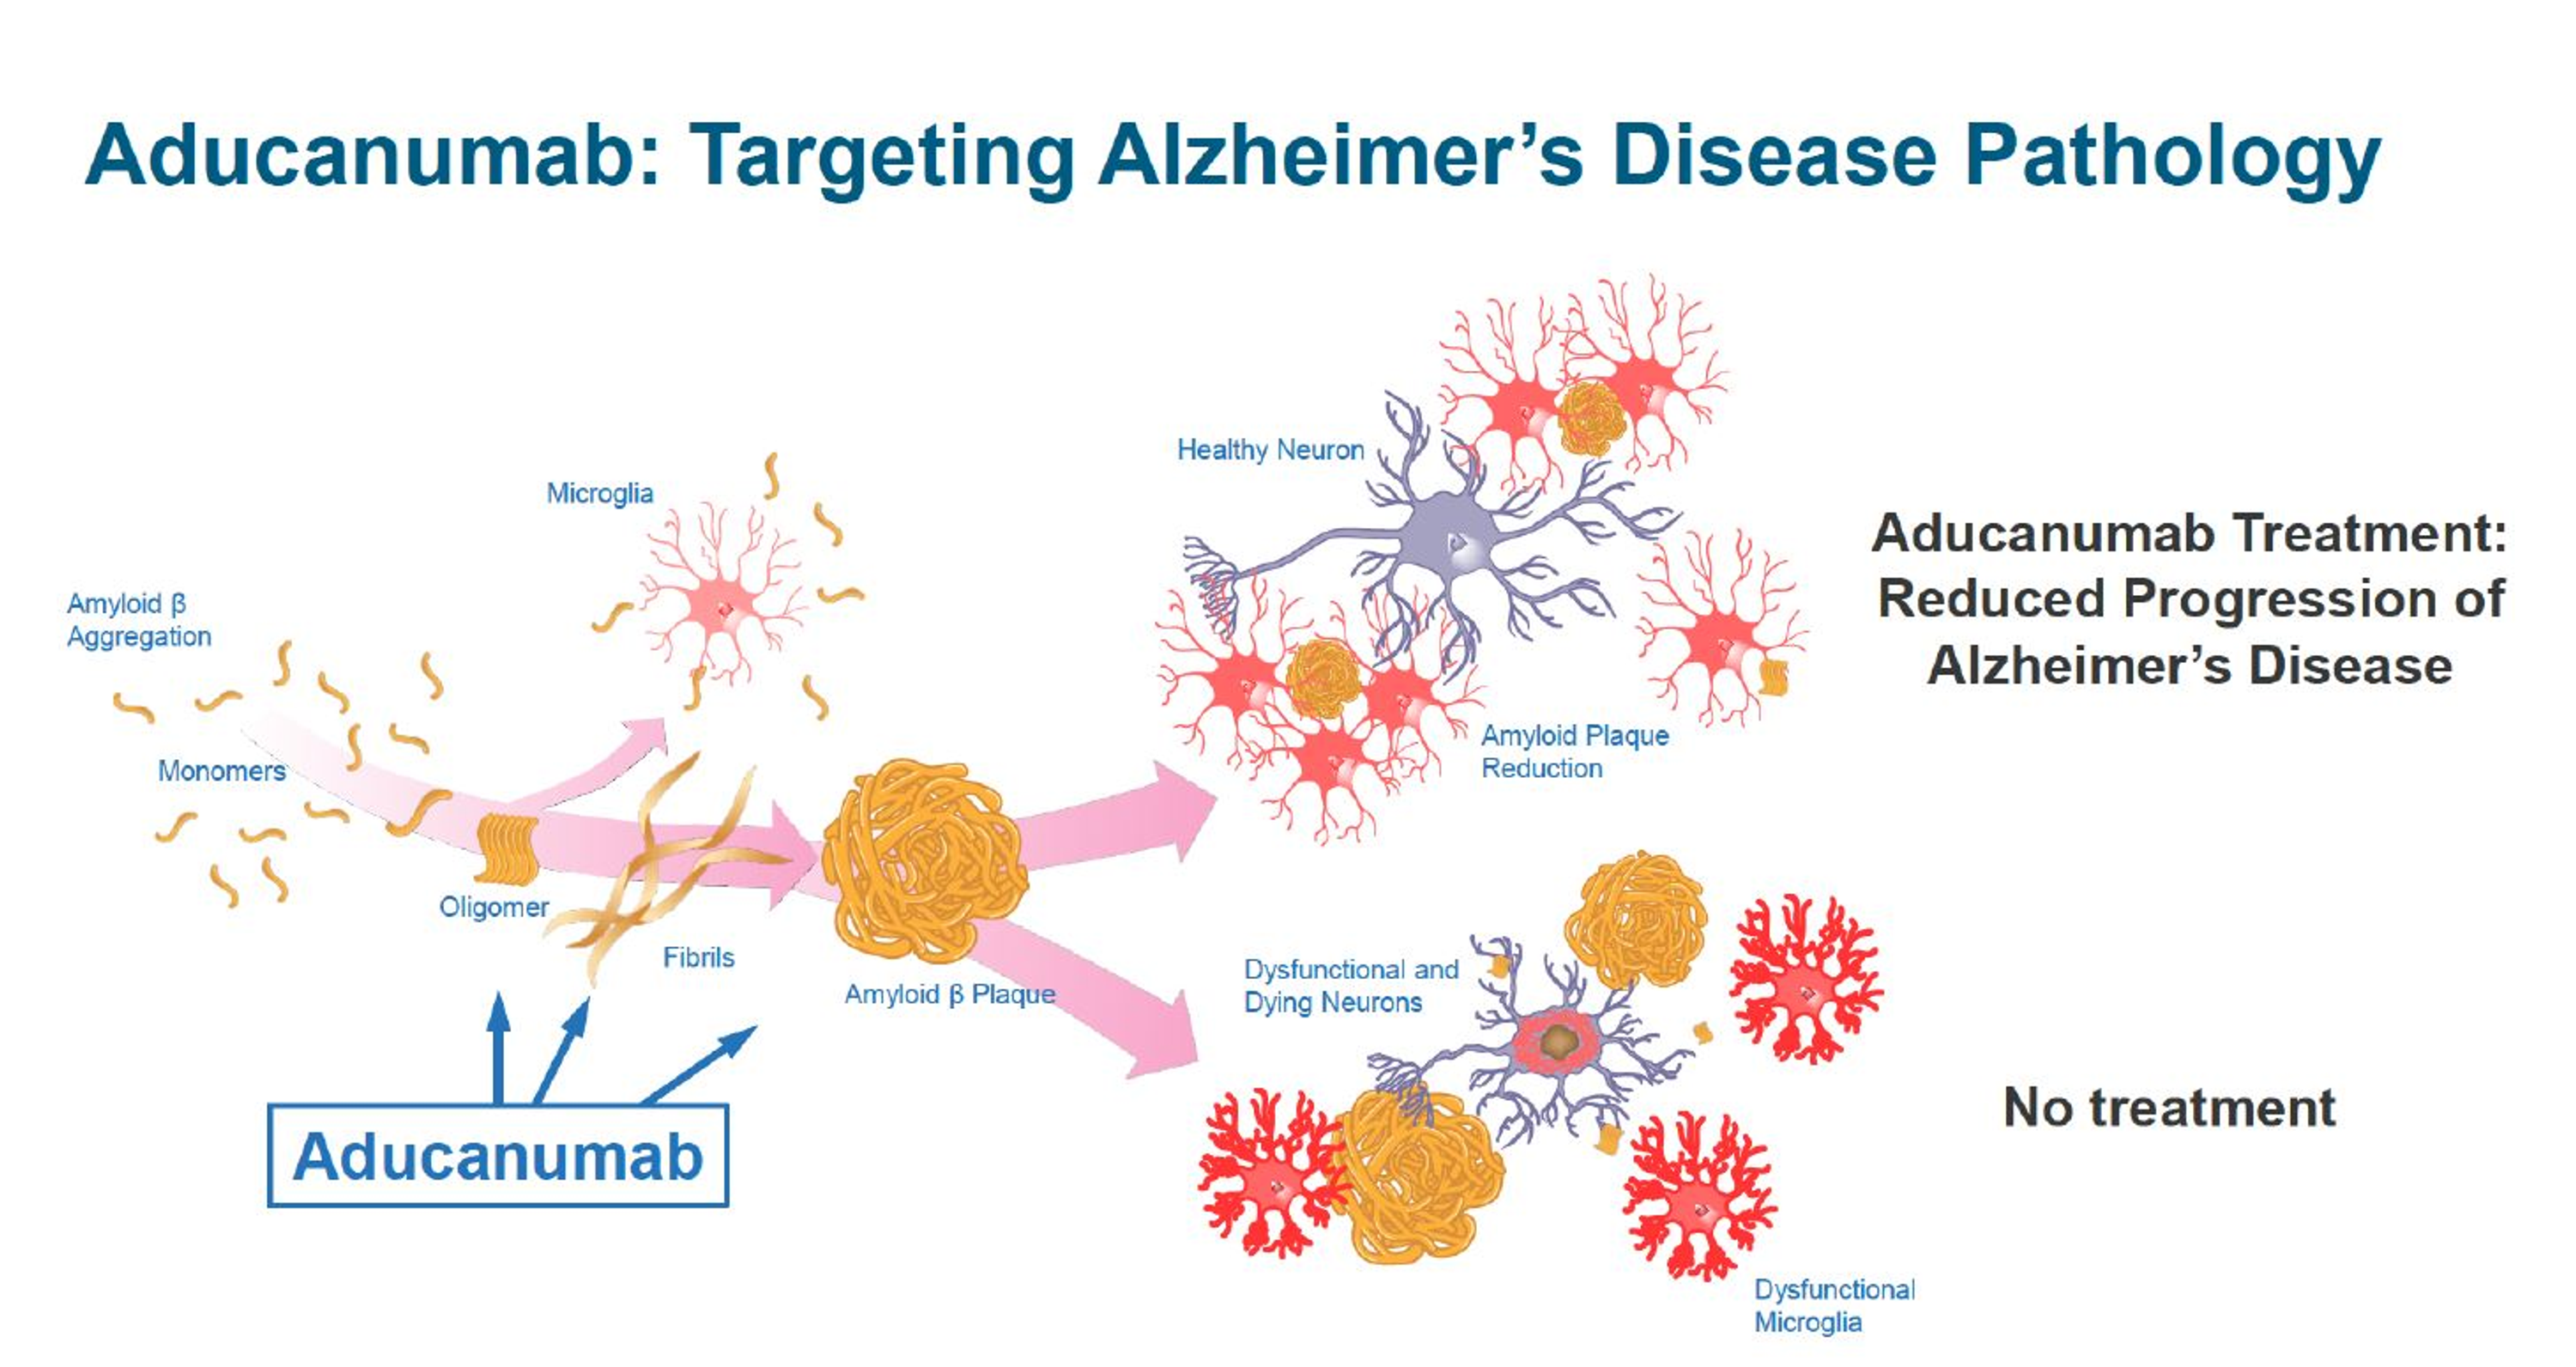 Cureus | Aducanumab as a Novel Treatment for Alzheimer's Disease: A Decade  of Hope, Controversies, and the Future